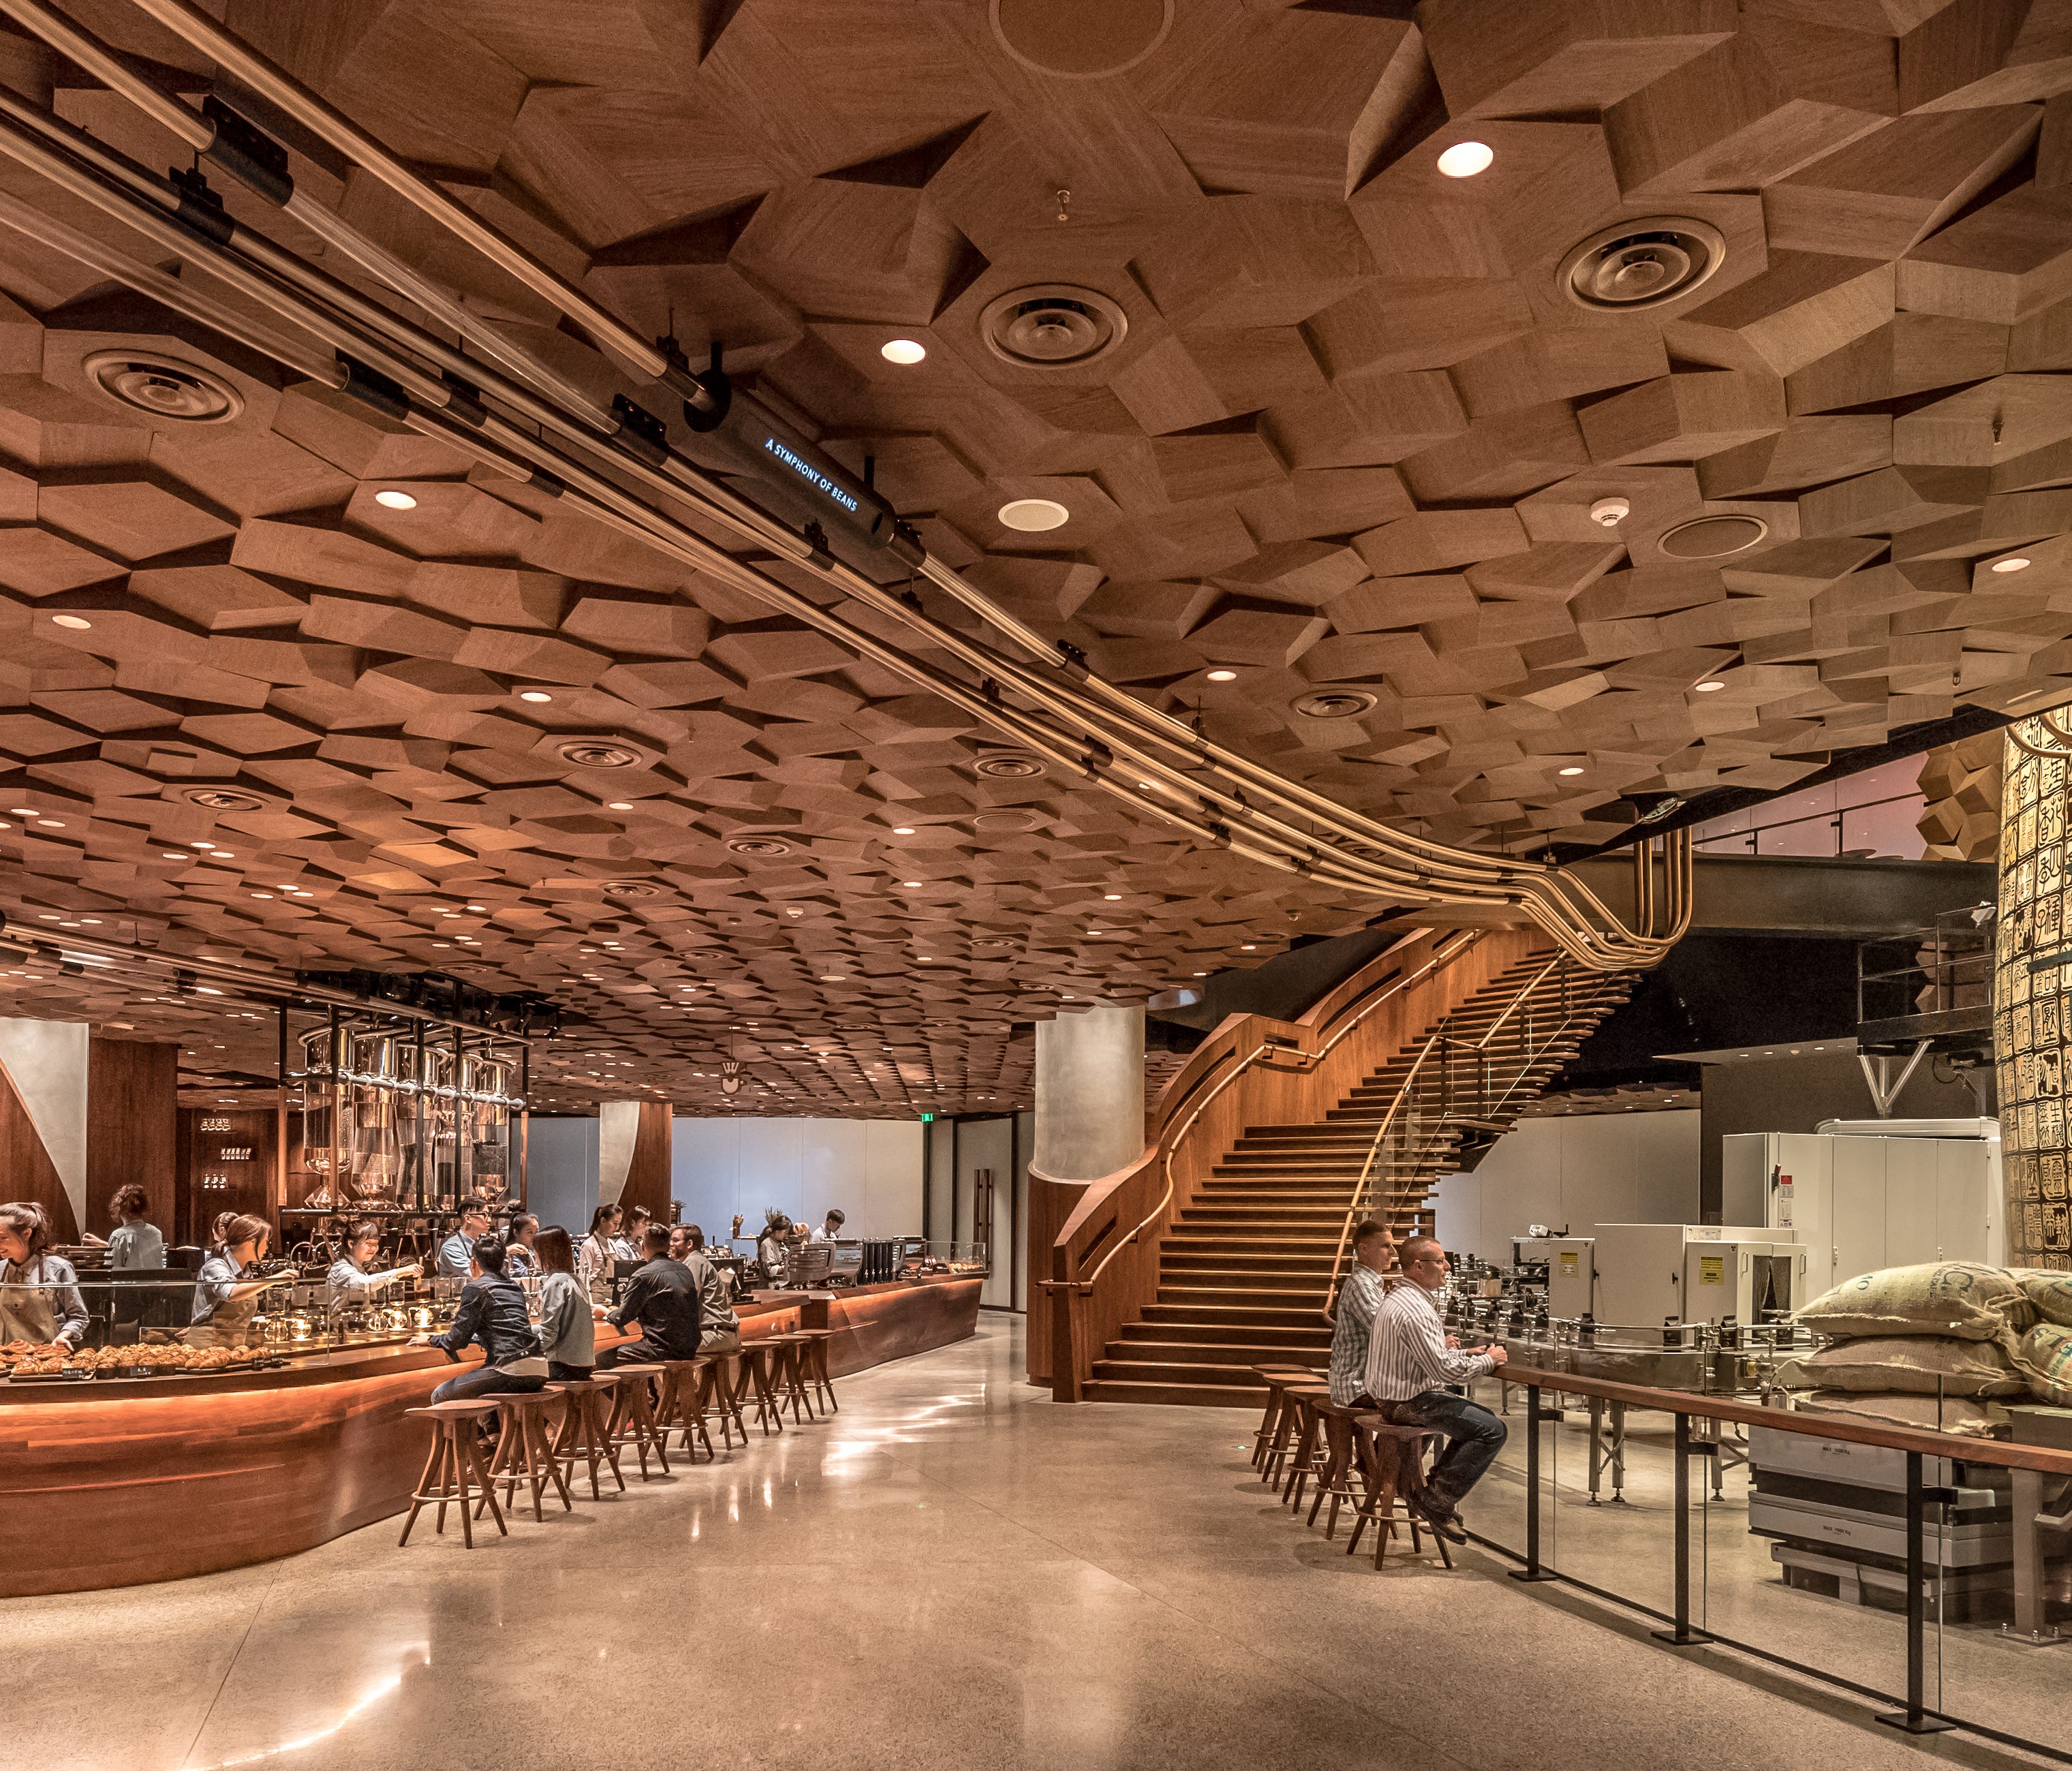 The new Starbucks Reserve Roastery, the biggest Starbucks in the world, opens in Shanghai on Wednesday morning local time.